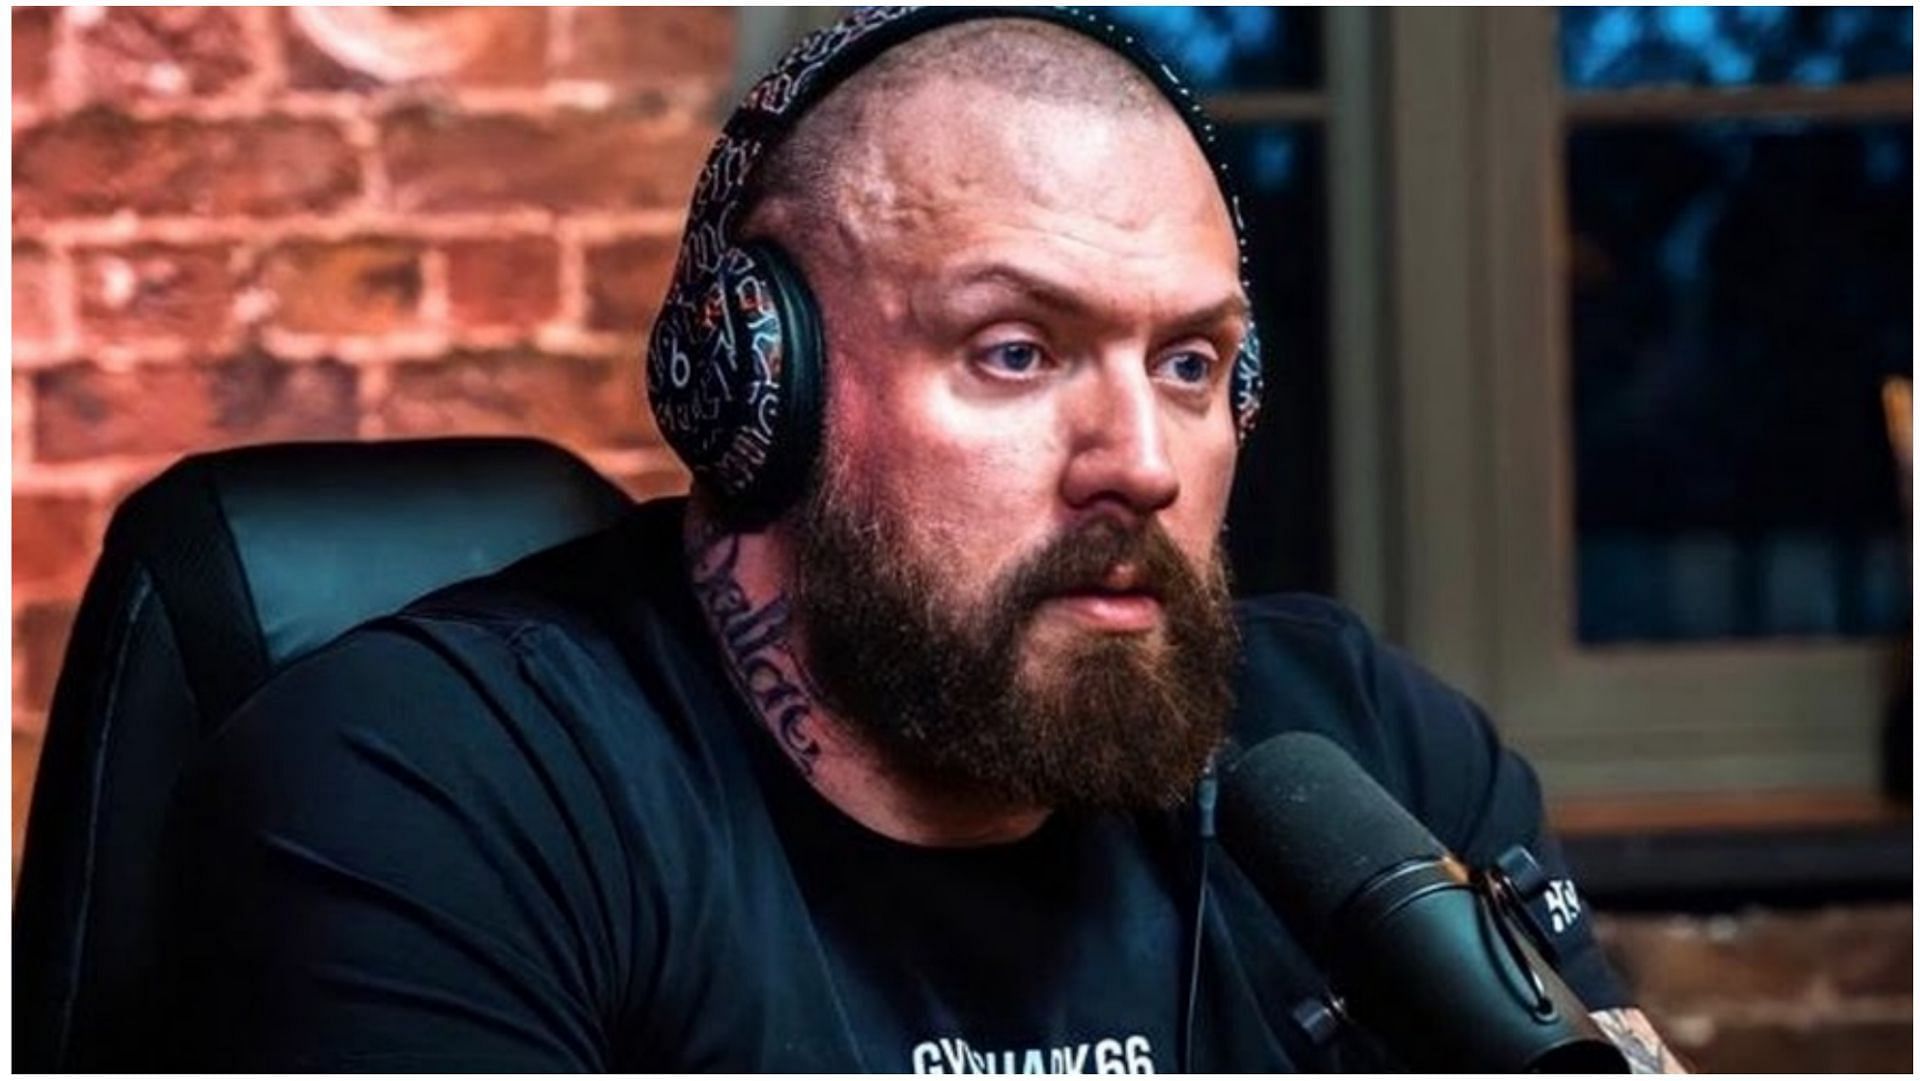 YouTuber and streamer True Geordie was banned from Twitch, possibly due to insensitive remarks directed at Andrew Tate. (Image via YouTube)